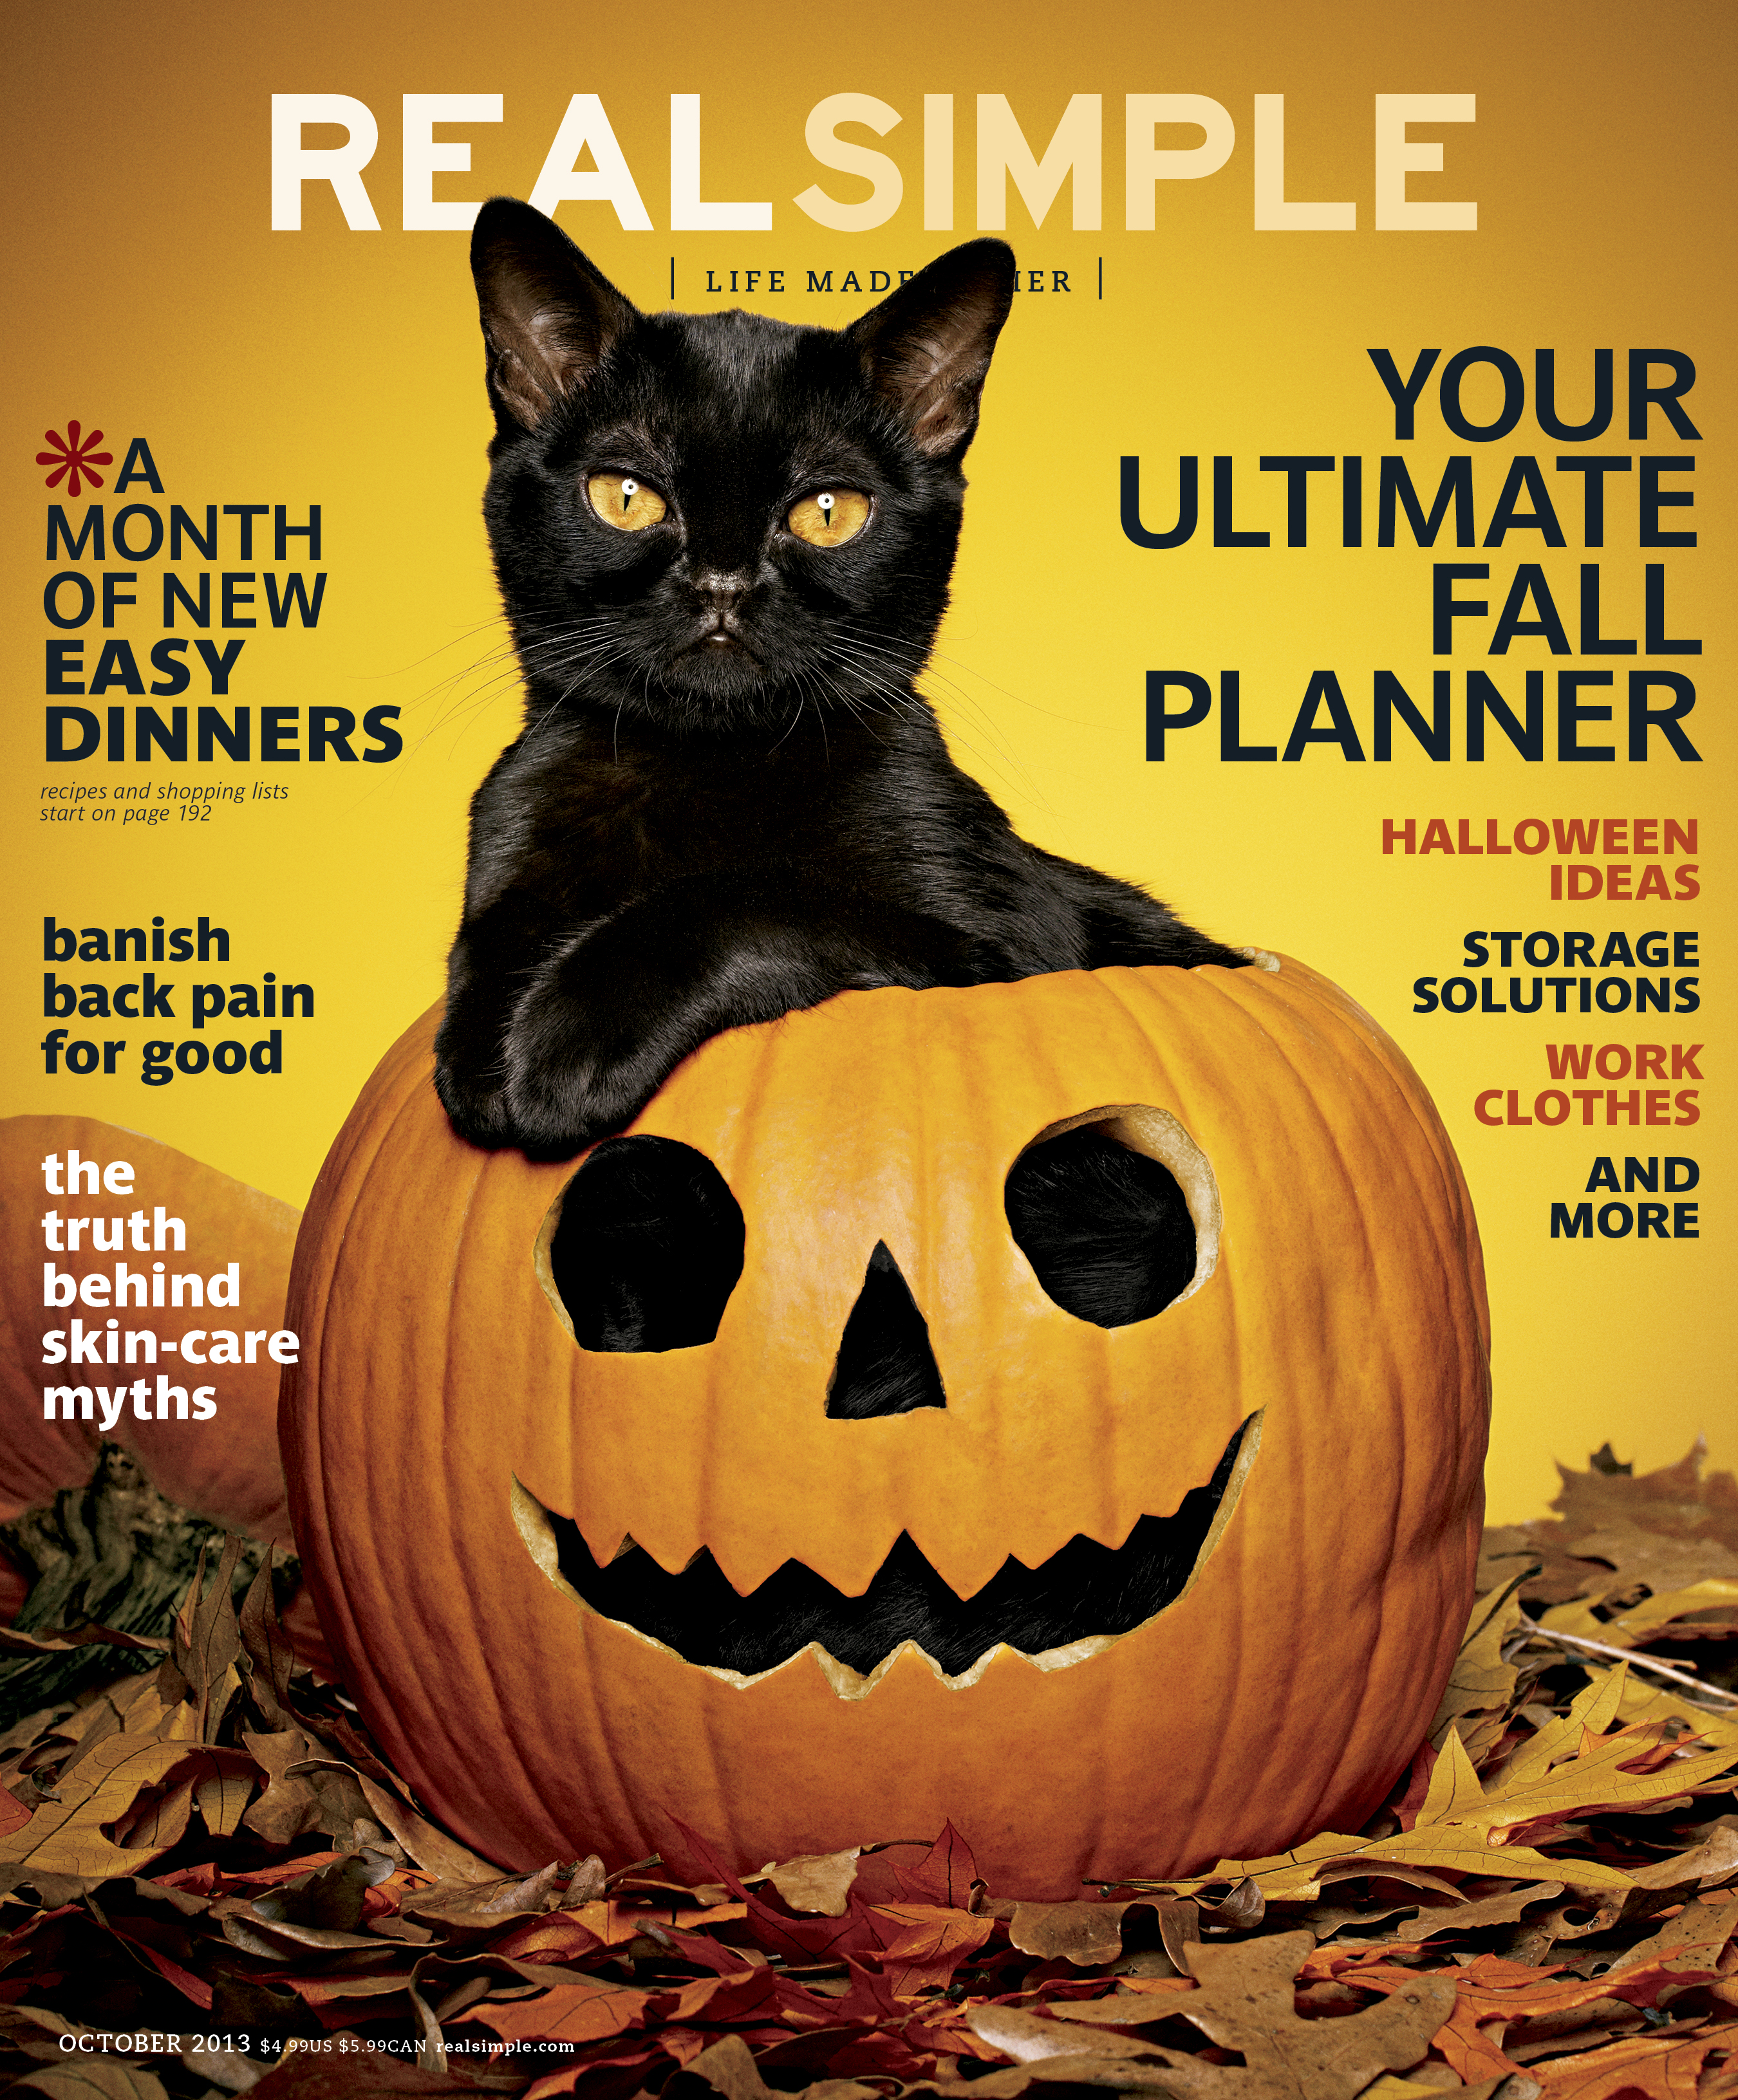 Real Simple-October, "Your Ultimate Fall Planner"